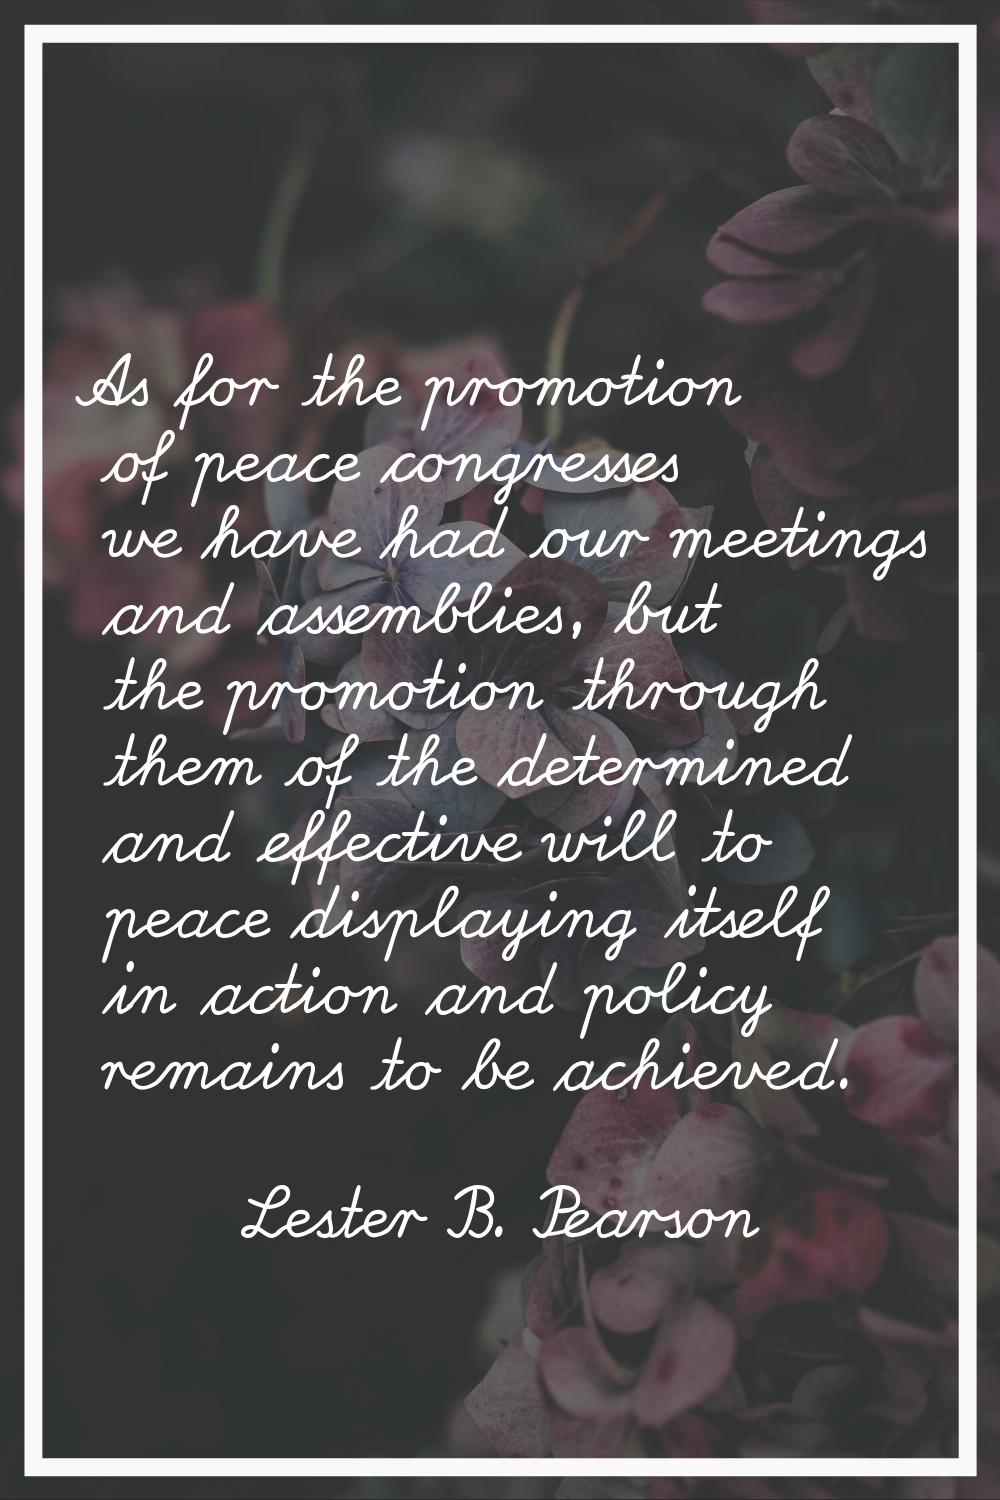 As for the promotion of peace congresses we have had our meetings and assemblies, but the promotion